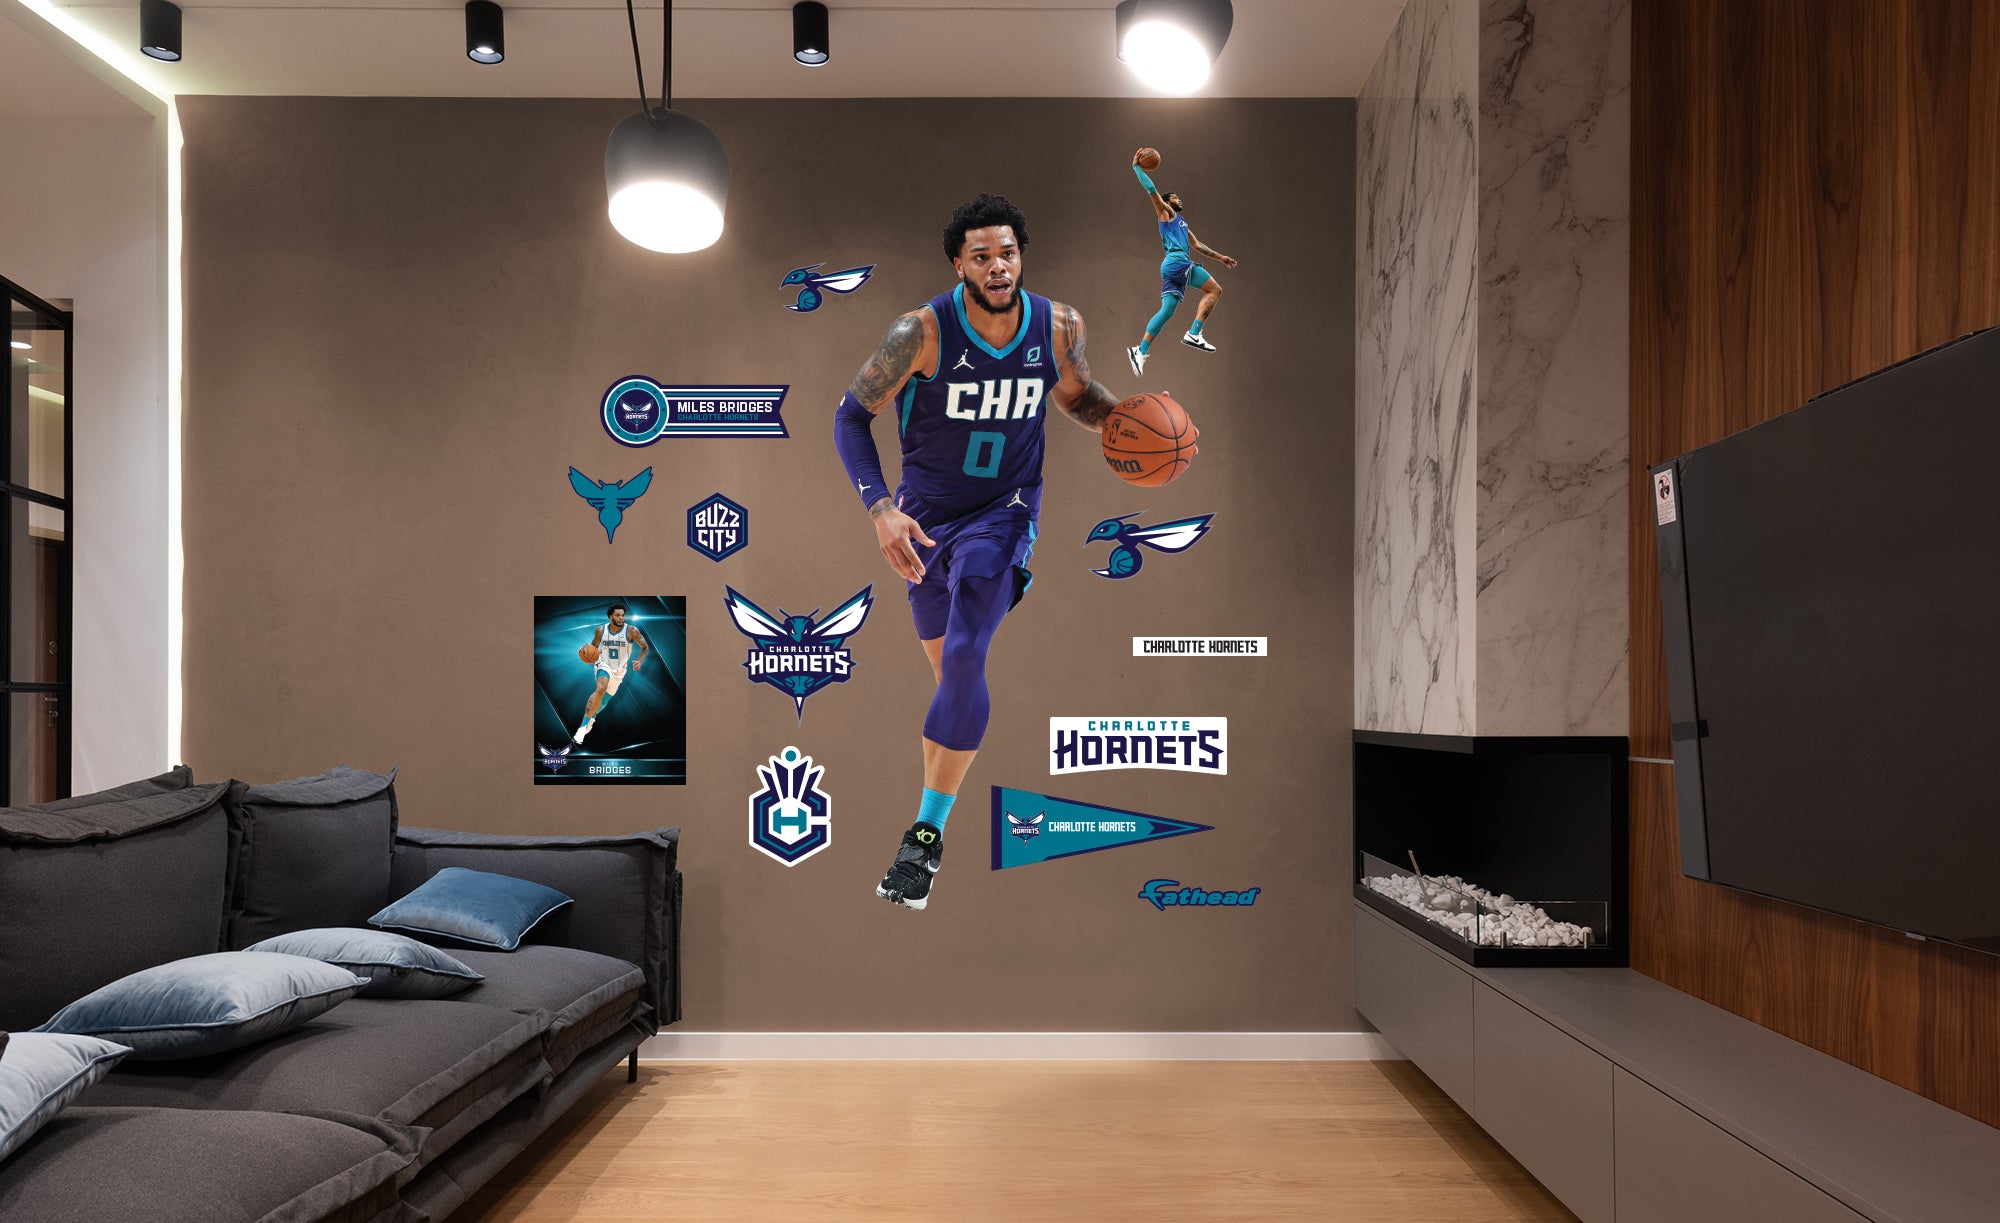 Charlotte Hornets: Miles Bridges 2021 Buzz City - NBA Removable Wall Adhesive Wall Decal Large